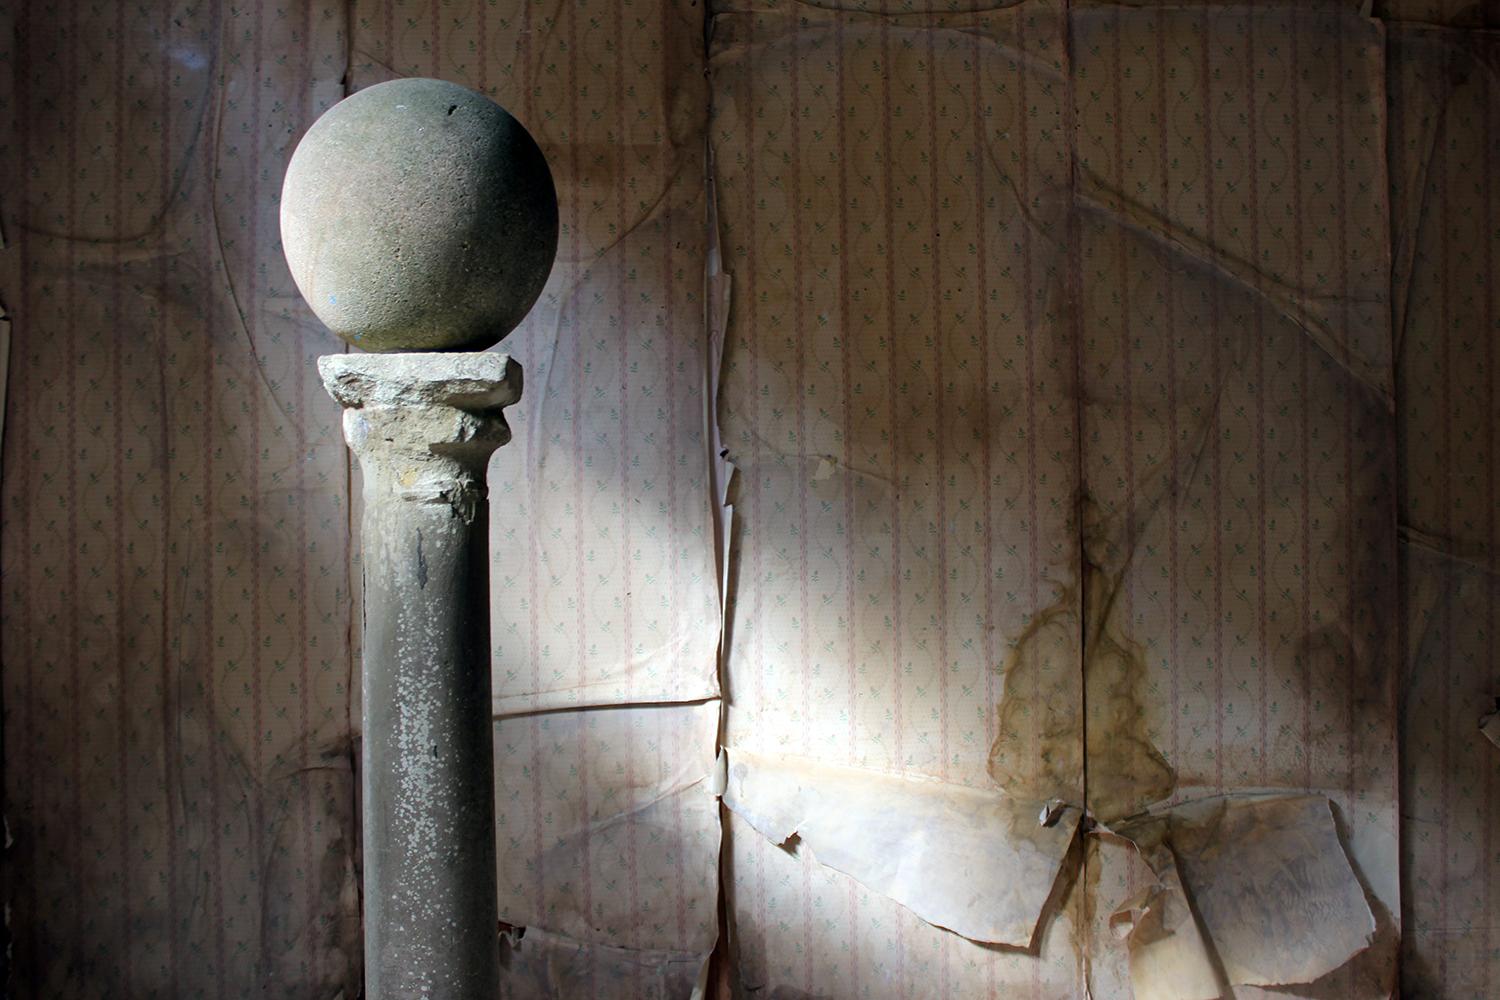 The limestone plinth column, of monastic origins, beautifully weathered with age, on a 20th century octagonal composition stone base and sphere top, surviving principally from the late medieval period.

The plinth has sub-millimetre flaking to the